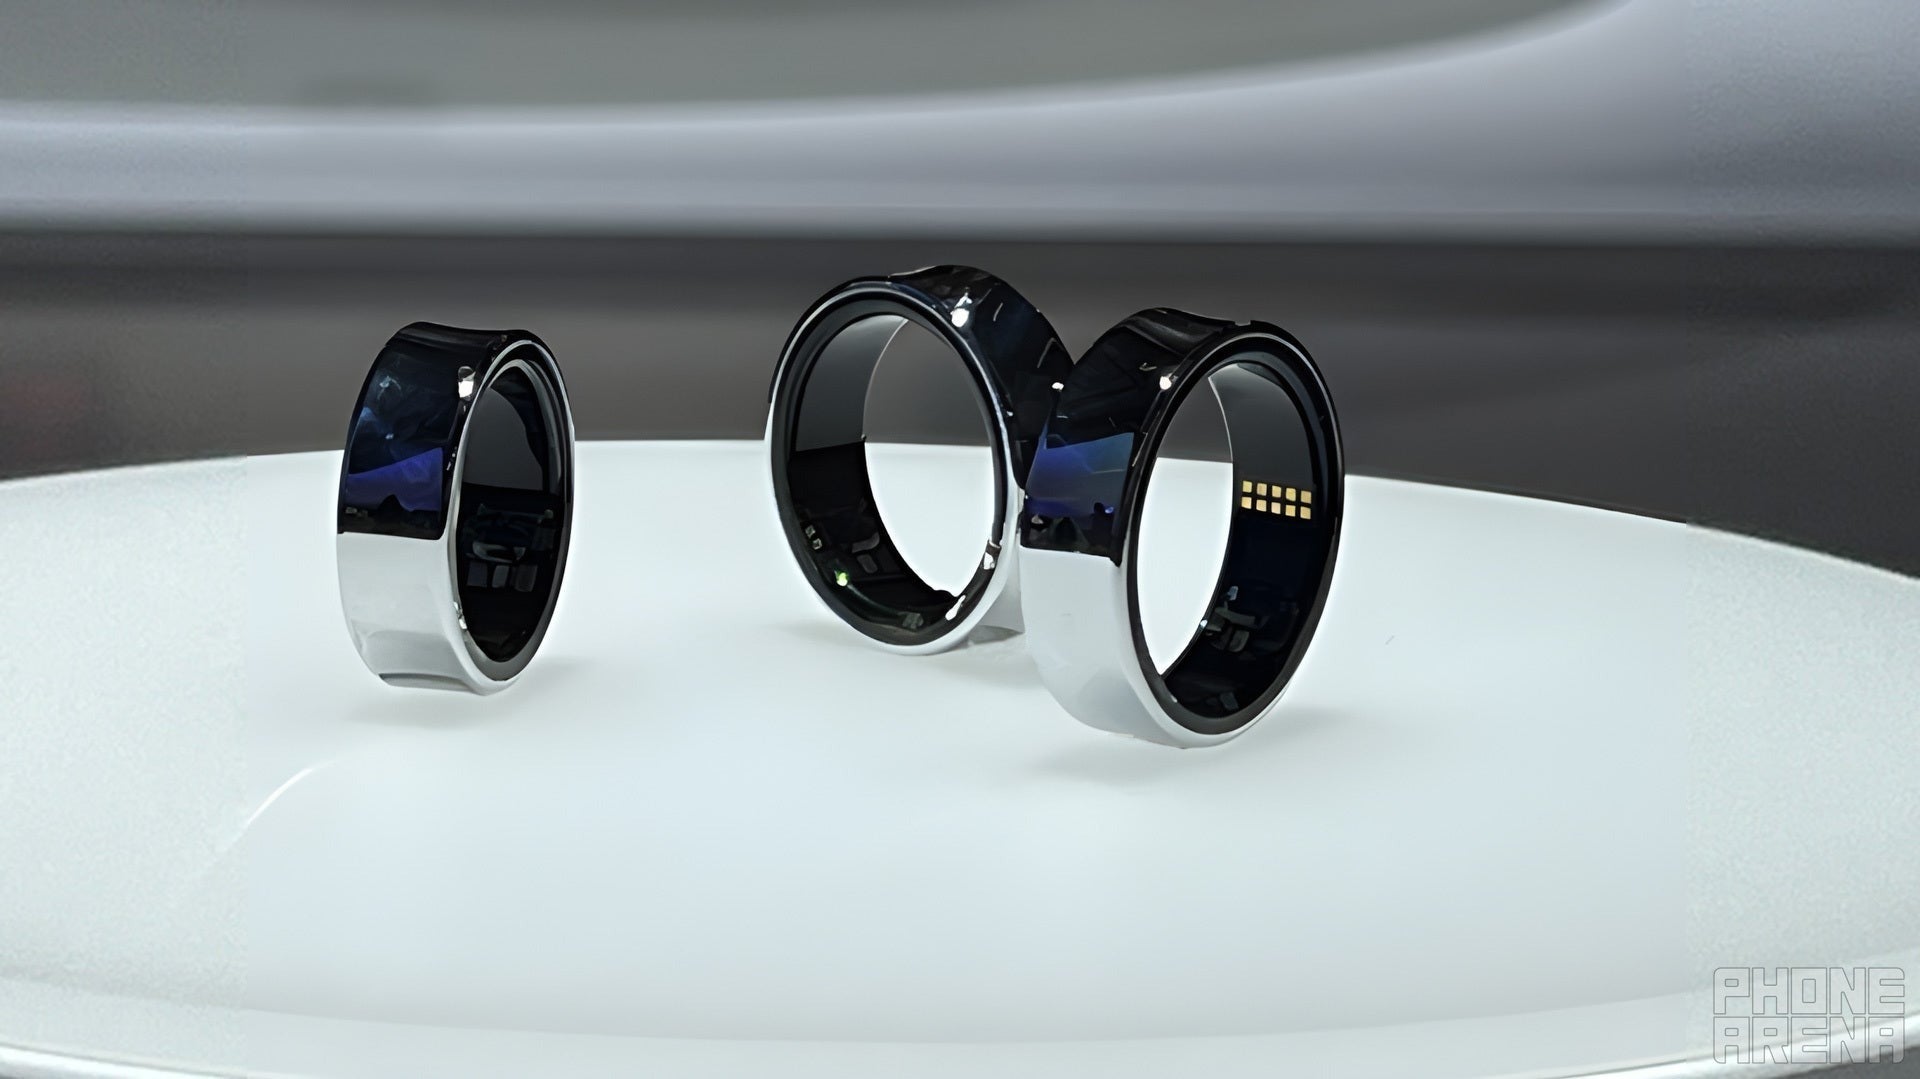 Samsung is so proud of the Galaxy Ring's form factor that it's keeping it proprietary.  Can iPhone users opt for a Galaxy Ring that turns Samsung Health into a walled garden?